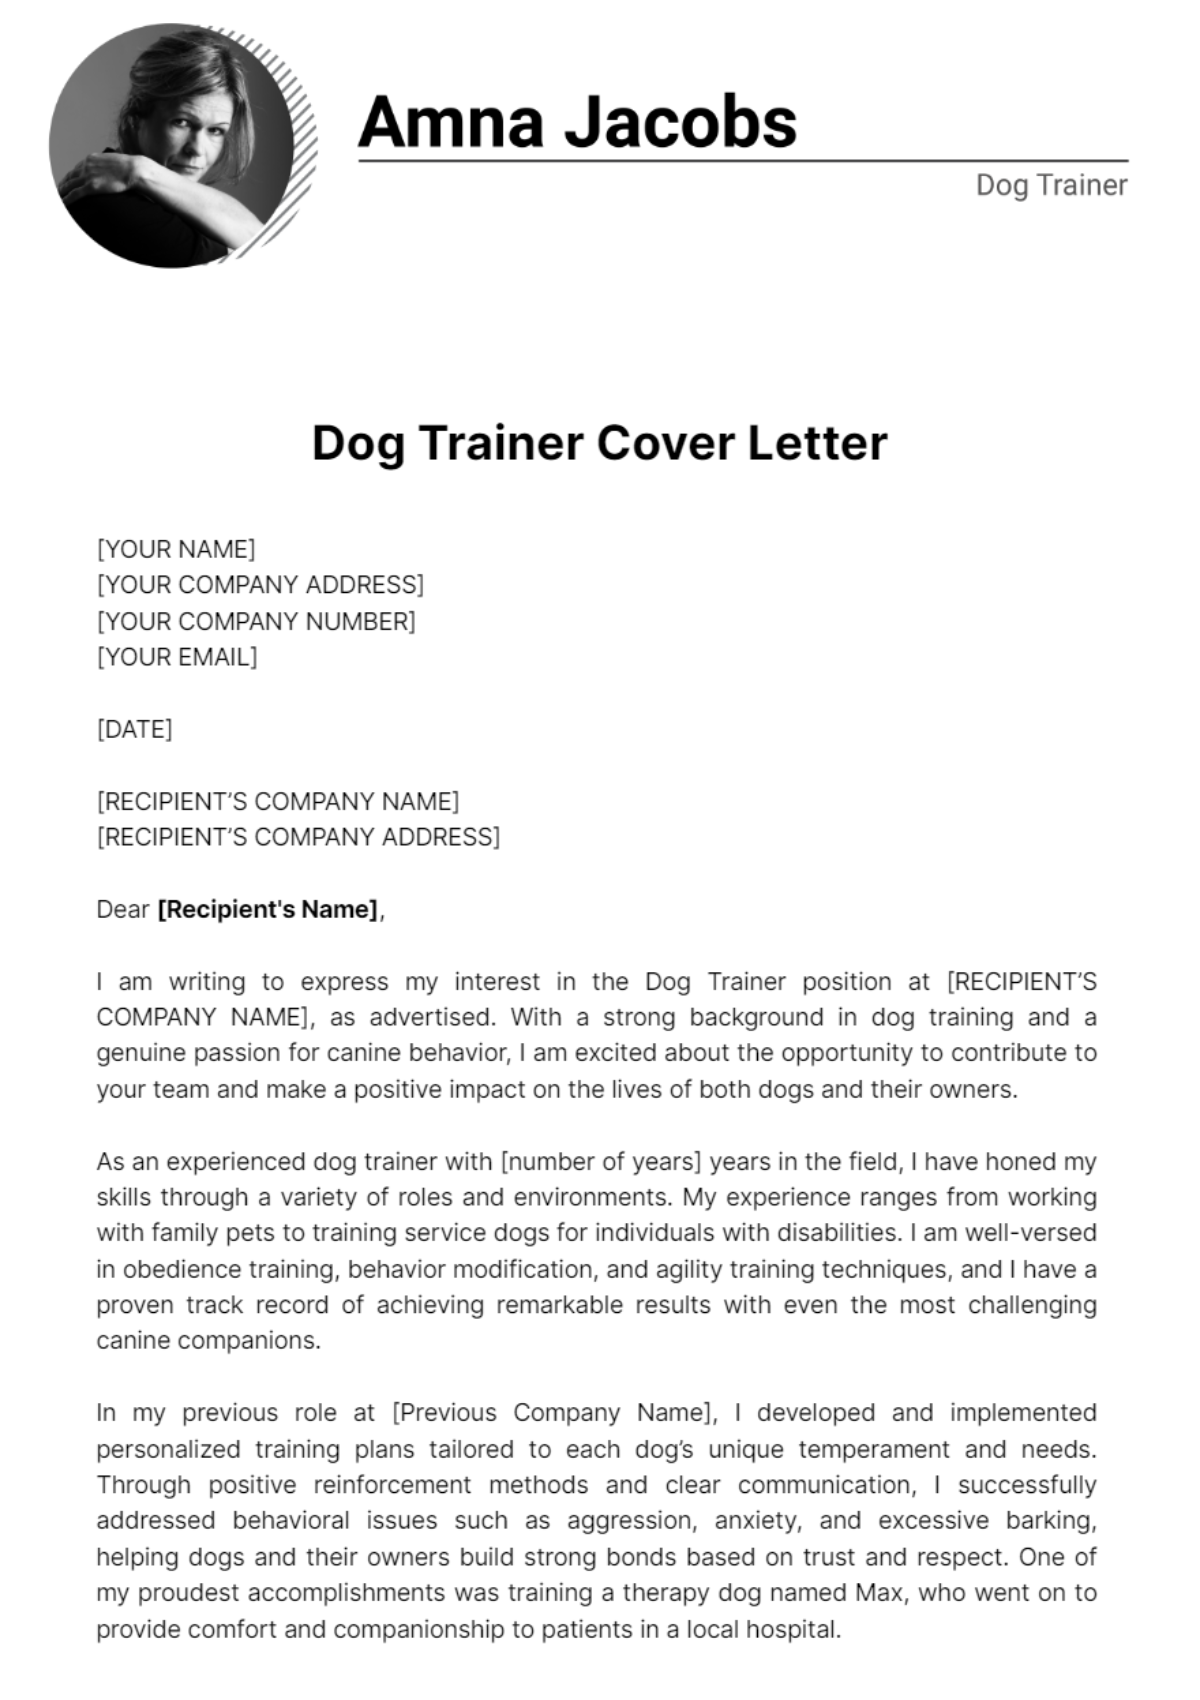 Free Dog Trainer Cover Letter Template